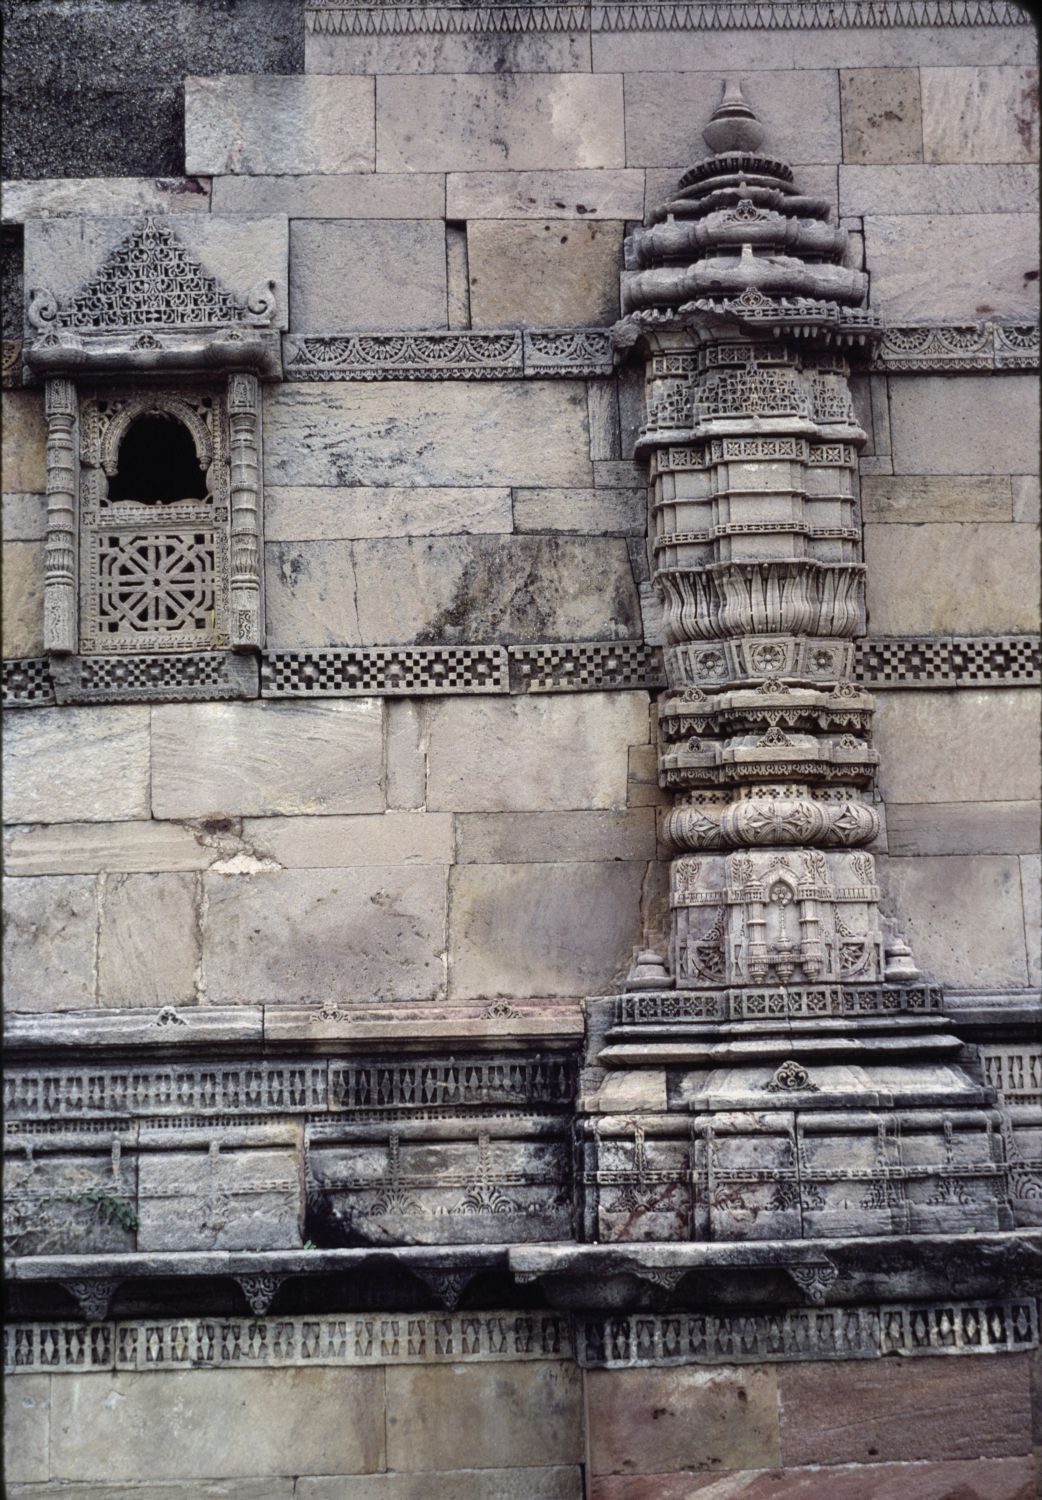 Exterior view of western (qibla) wall showing an ornate carved buttress and small window.